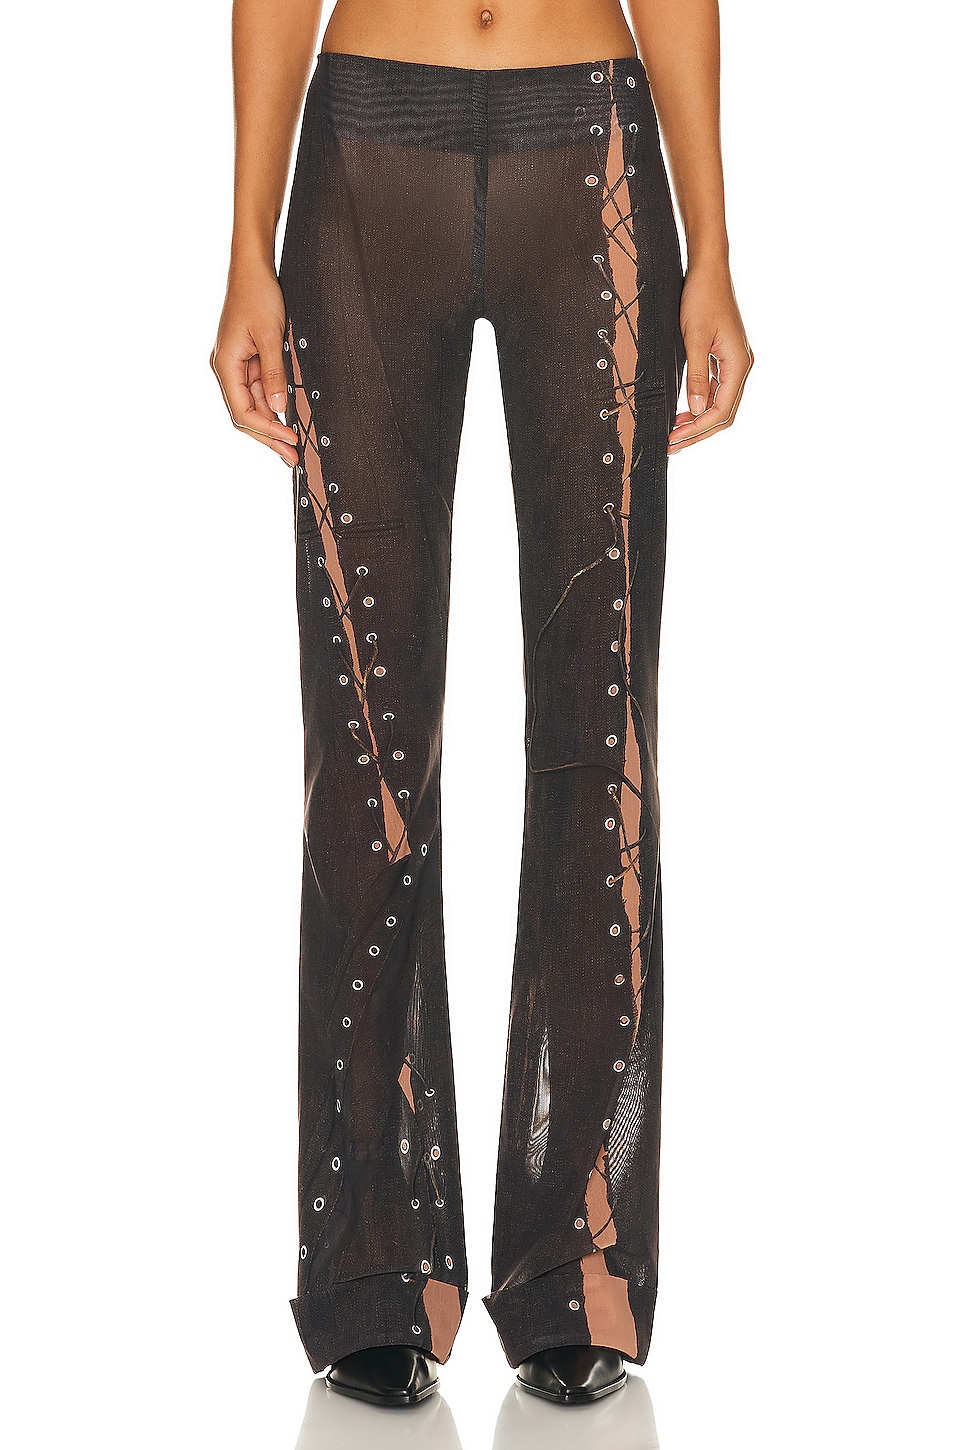 Image 1 of Acne Studios Lace Up Pant in Dark Brown